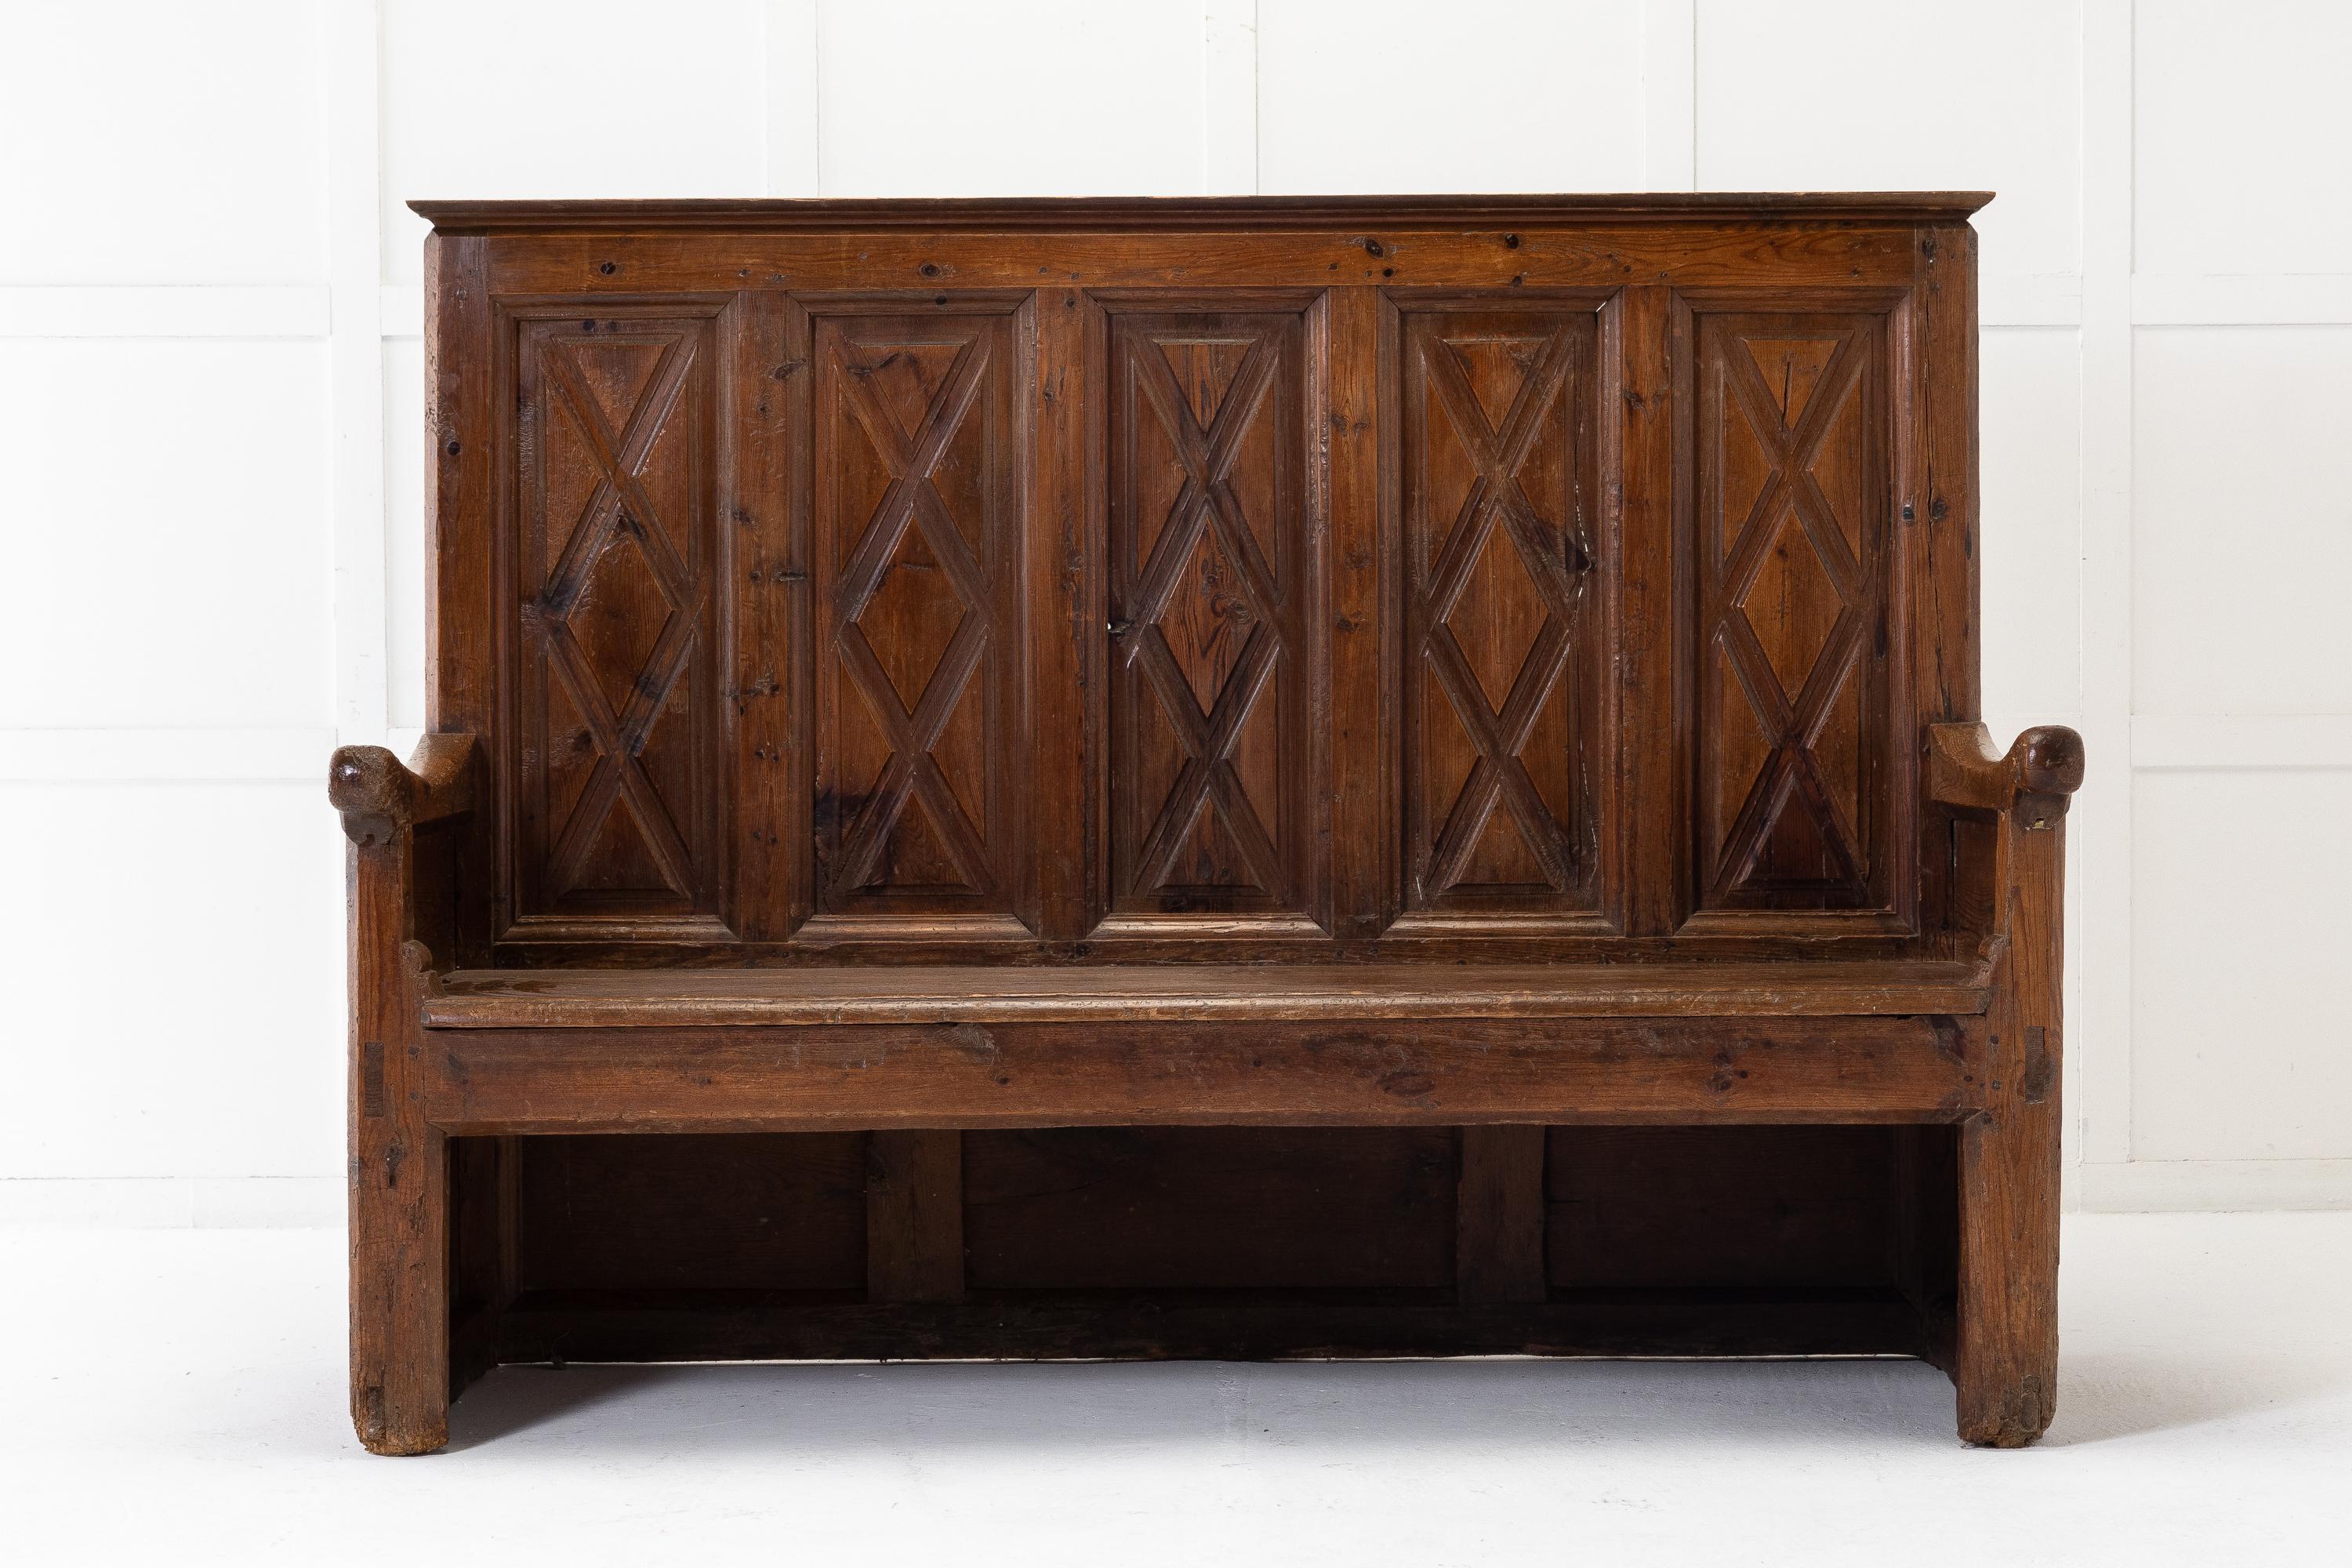 18th Century Spanish pine rustic bench with a high back topped with a moulded cornice. Five fielded panels are decorated with geometrical diamond shapes, the patterns continue to the sides and are similar on the back with lower three panels to the